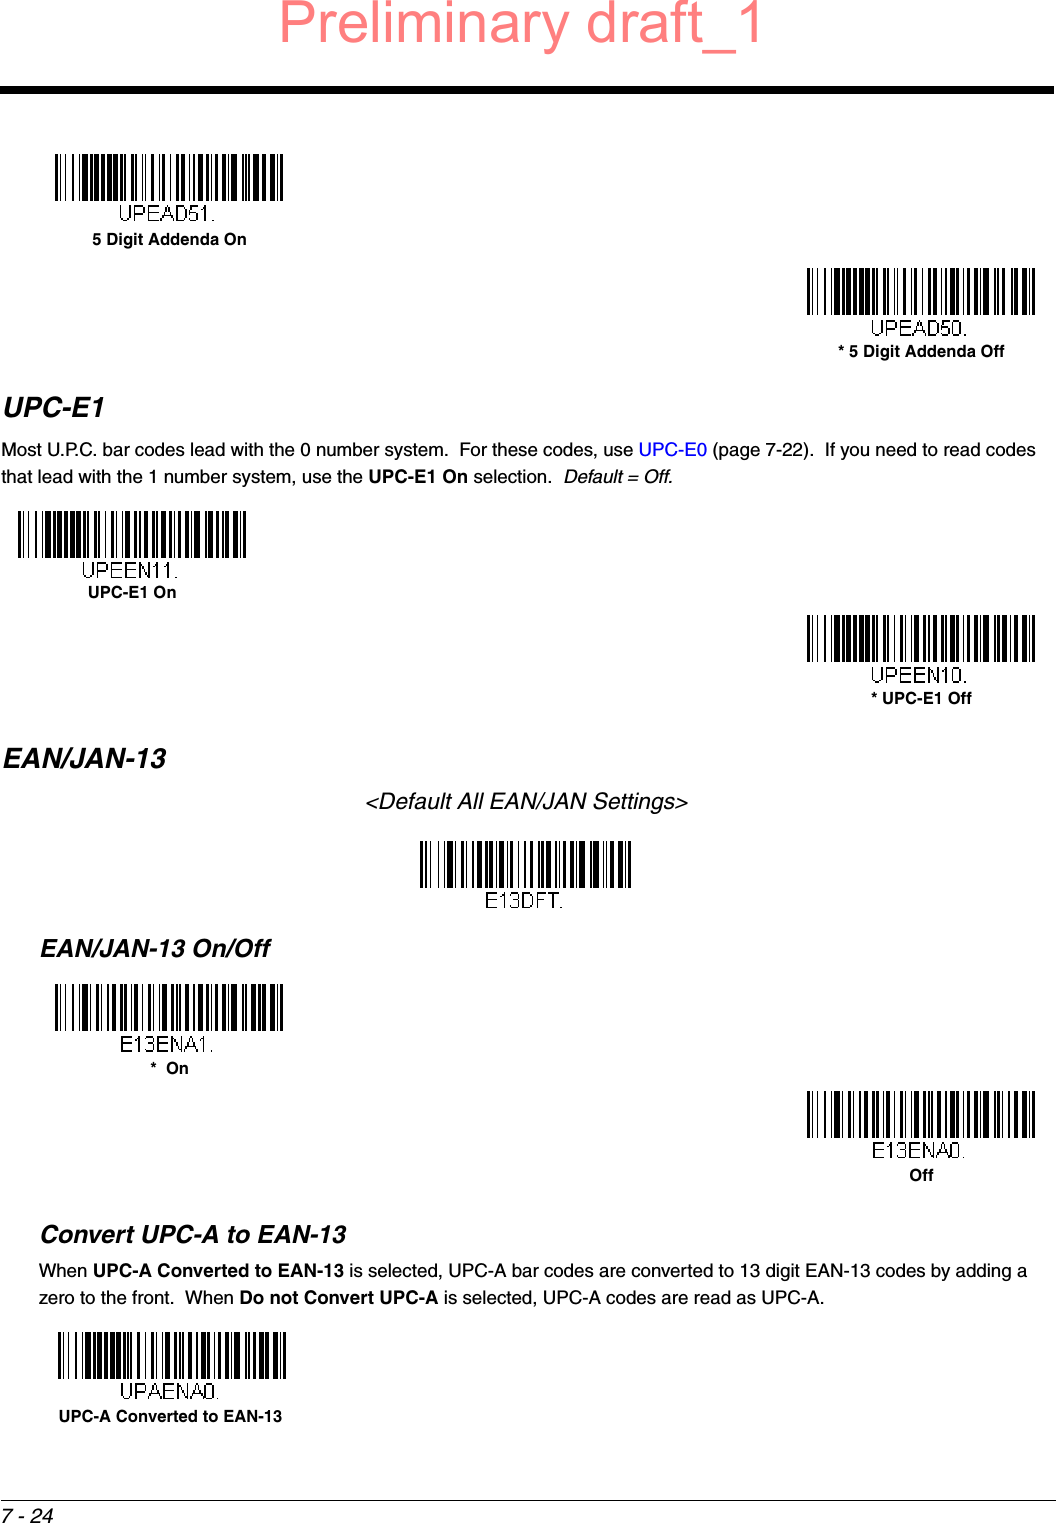 7 - 24UPC-E1Most U.P.C. bar codes lead with the 0 number system.  For these codes, use UPC-E0 (page 7-22).  If you need to read codes that lead with the 1 number system, use the UPC-E1 On selection.  Default = Off.EAN/JAN-13&lt;Default All EAN/JAN Settings&gt;EAN/JAN-13 On/OffConvert UPC-A to EAN-13When UPC-A Converted to EAN-13 is selected, UPC-A bar codes are converted to 13 digit EAN-13 codes by adding a zero to the front.  When Do not Convert UPC-A is selected, UPC-A codes are read as UPC-A.5 Digit Addenda On* 5 Digit Addenda OffUPC-E1 On* UPC-E1 Off*  OnOffUPC-A Converted to EAN-13Preliminary draft_1